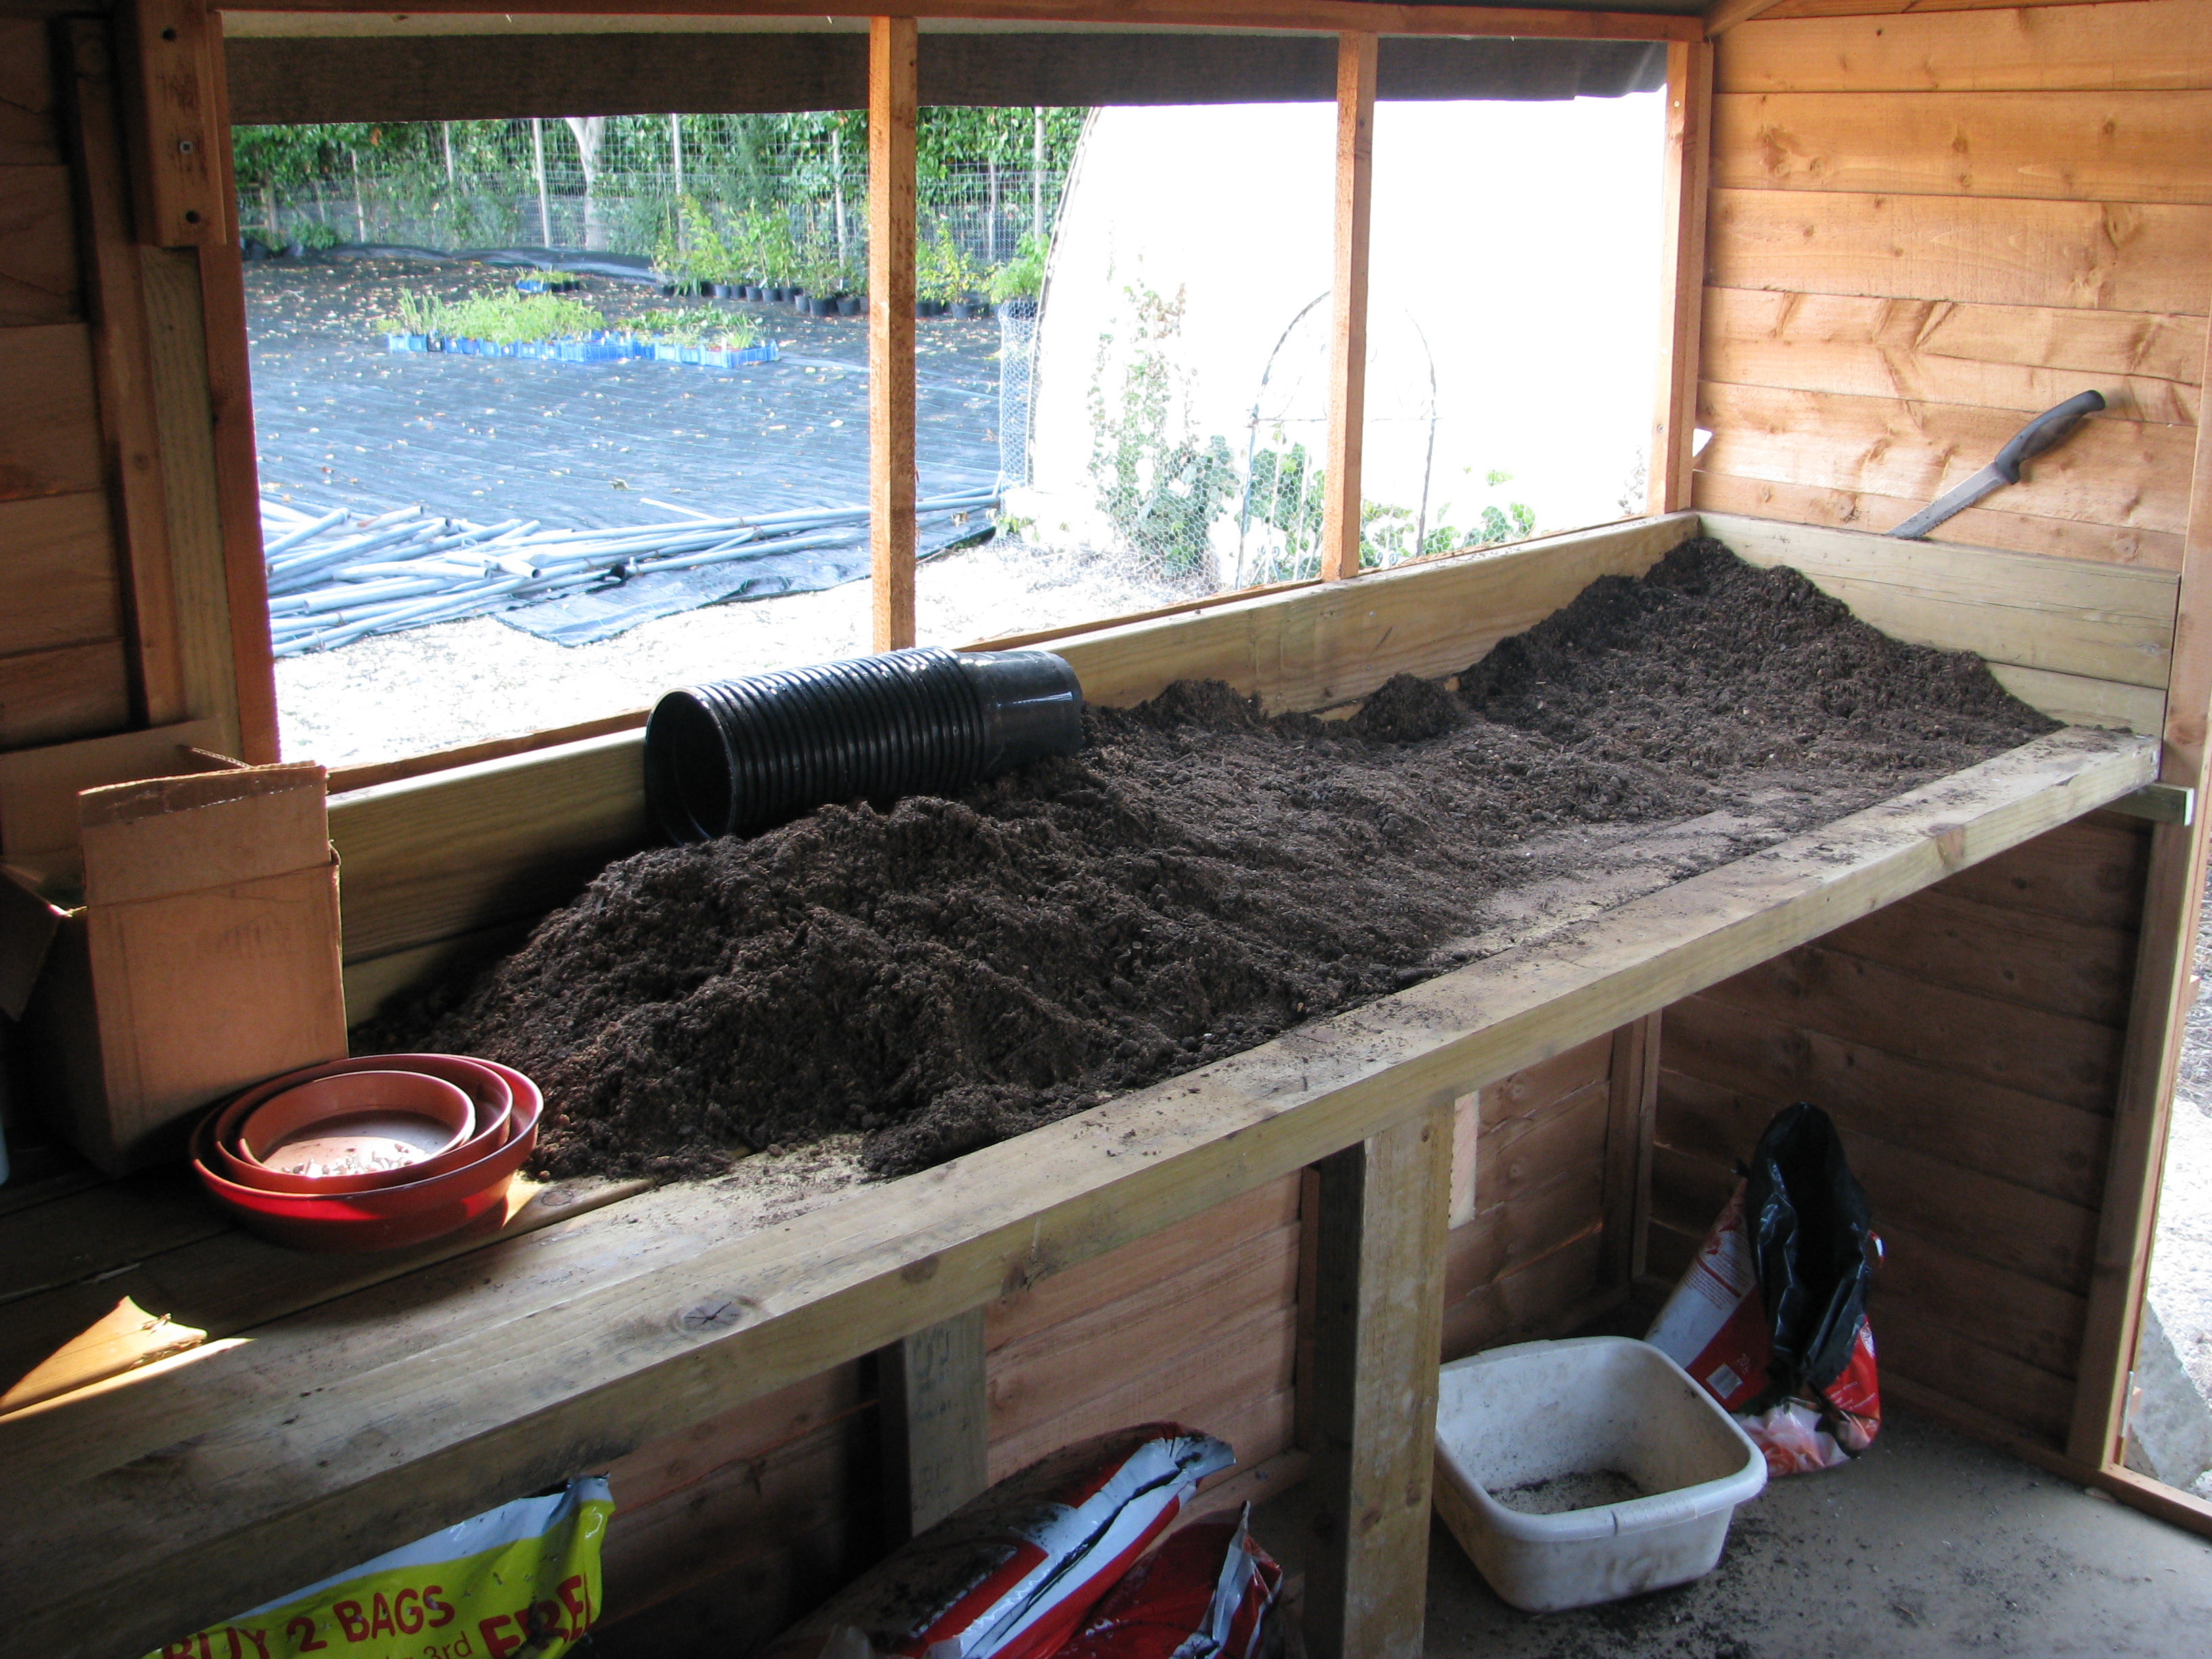 Soil all over a potting bench